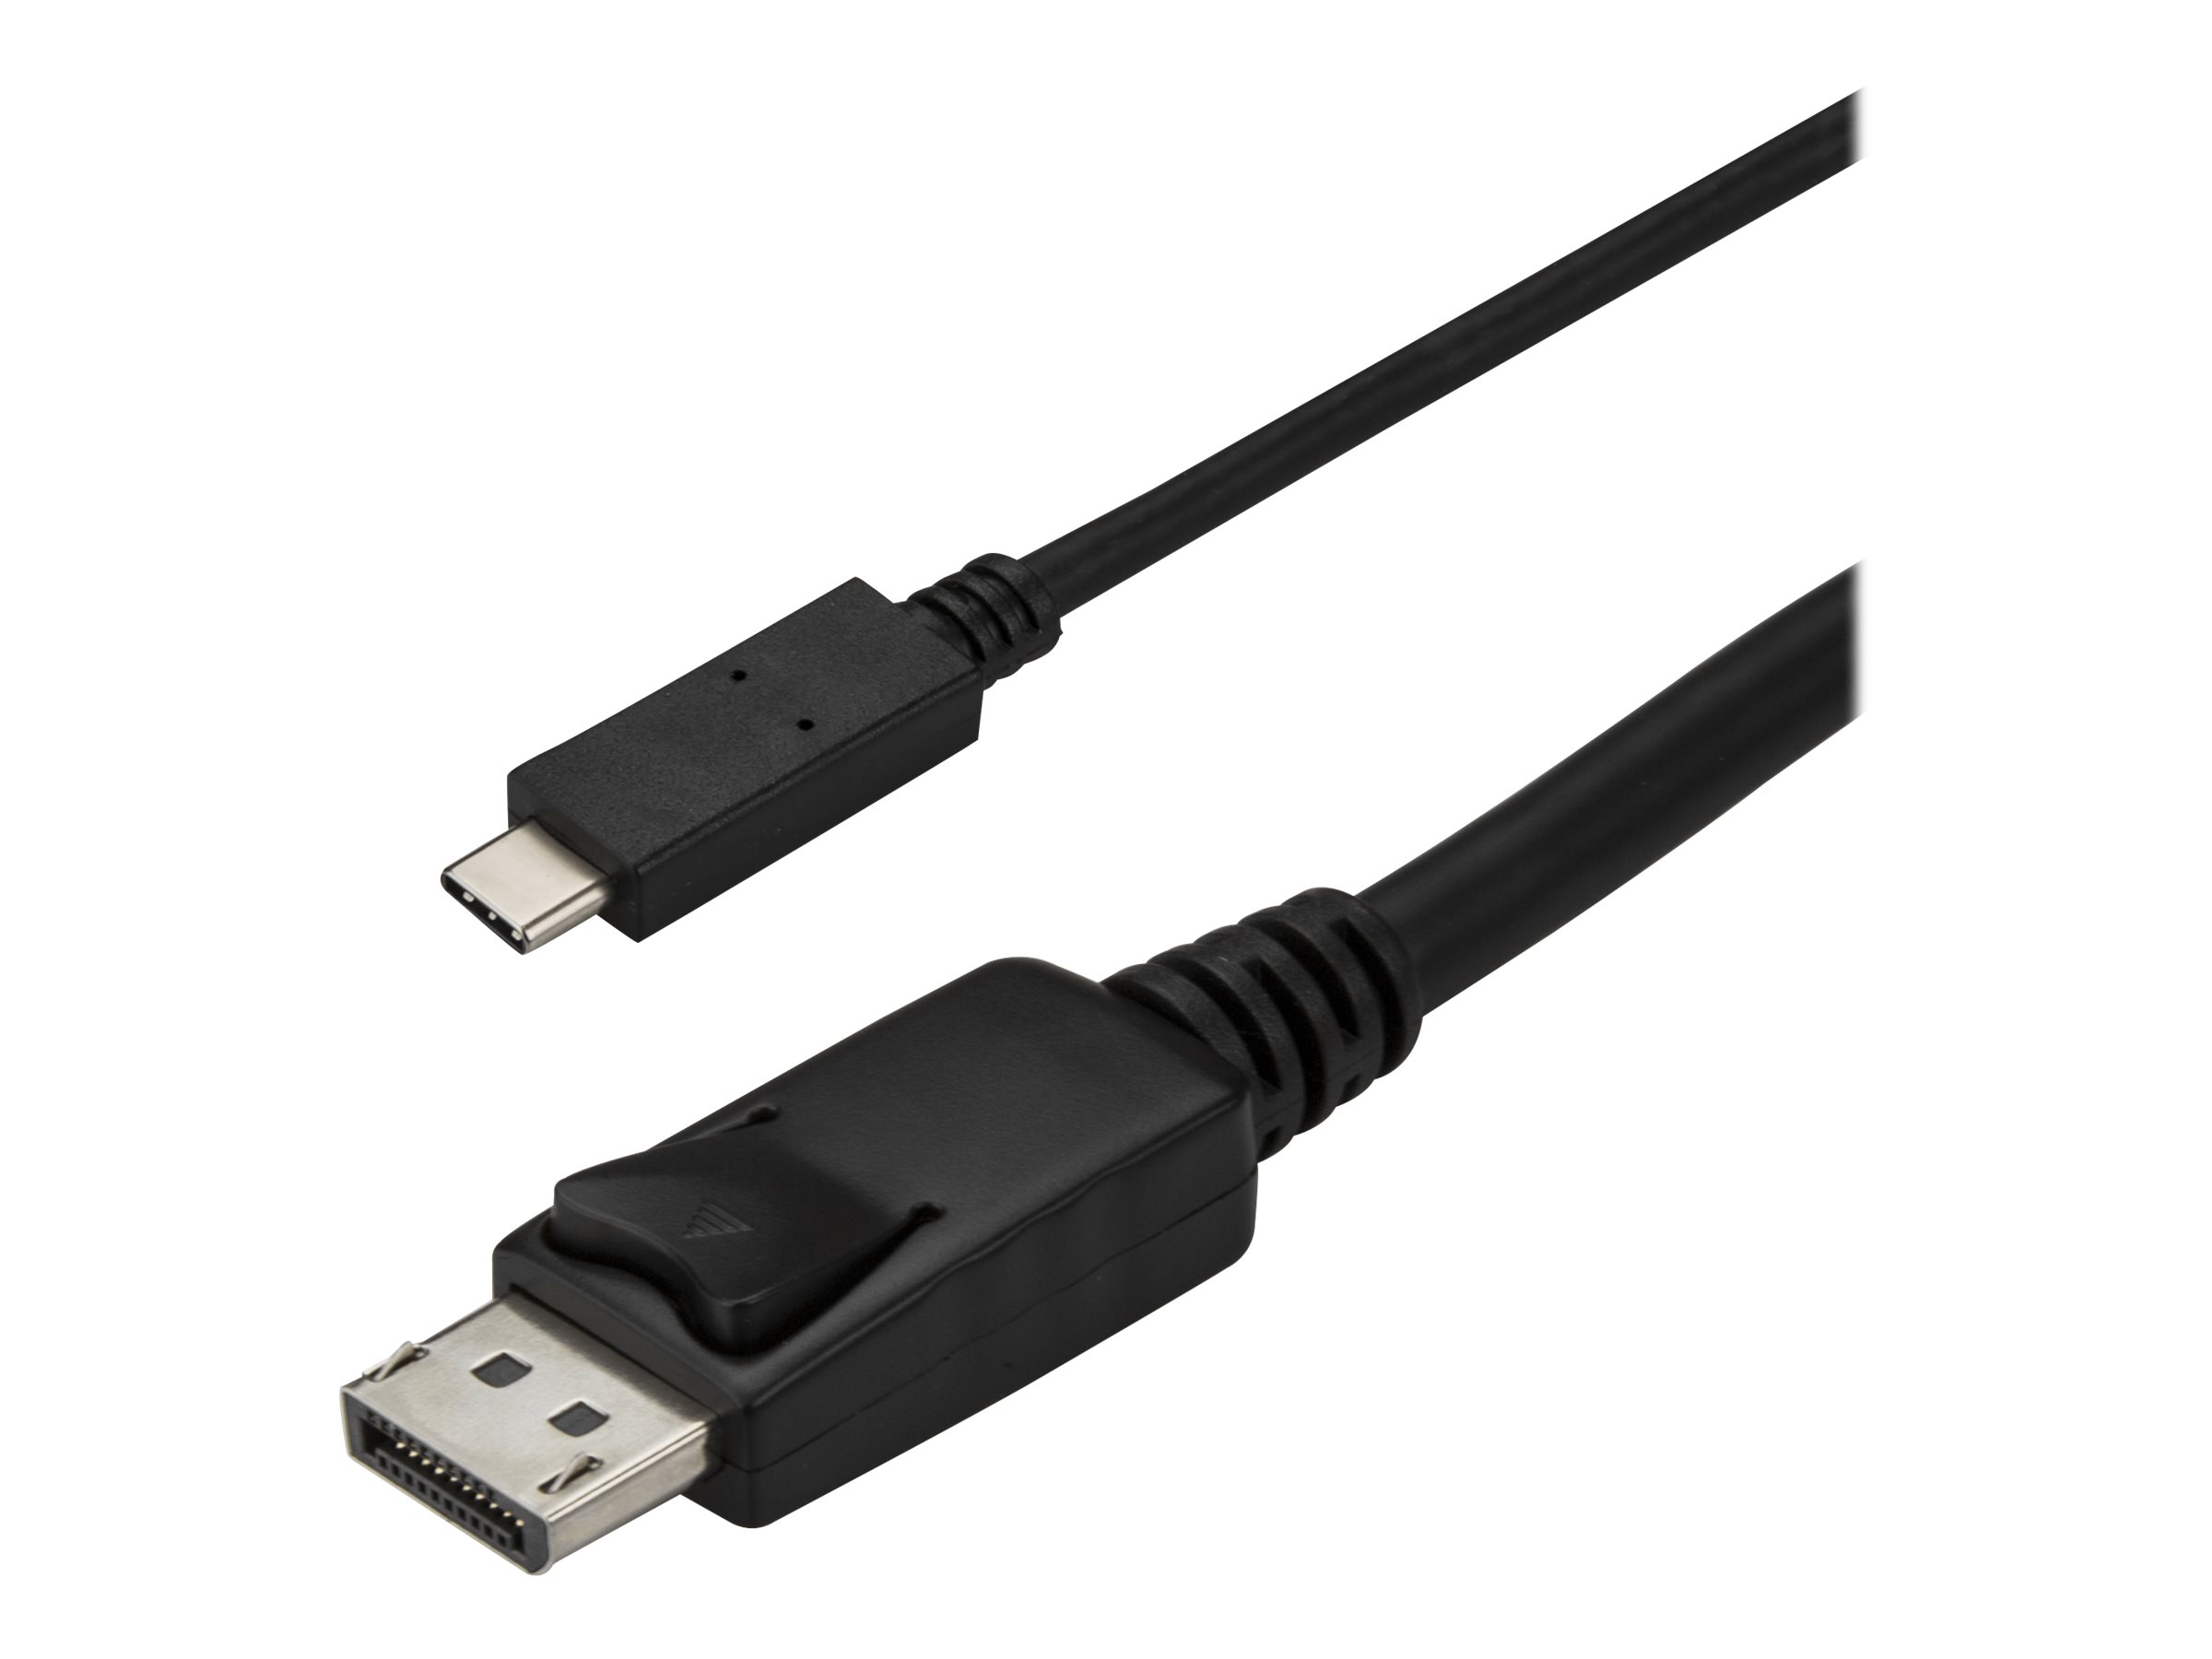 StarTech.com 3ft/1m USB C to DisplayPort 1.2 Cable 4K 60Hz, USB-C to DisplayPort Adapter Cable HBR2, USB Type-C DP Alt Mode to DP Monitor Video Cable, Compatible with Thunderbolt 3, Black - USB-C Male to DP Male (CDP2DPMM1MB) - Câble DisplayPort - 24 pin USB-C (M) pour DisplayPort (M) - Displayport 1.2/Thunderbolt 3 - 1 m - support pour 4K60Hz (3840 x 2160) - noir - pour P/N: TB33A1C, TB3DK2DPM2, TB3DKDPMAW, TB3DKDPMAWUE, TB3DOCK2DPPD, TB3DOCK2DPPU - CDP2DPMM1MB - Câbles vidéo